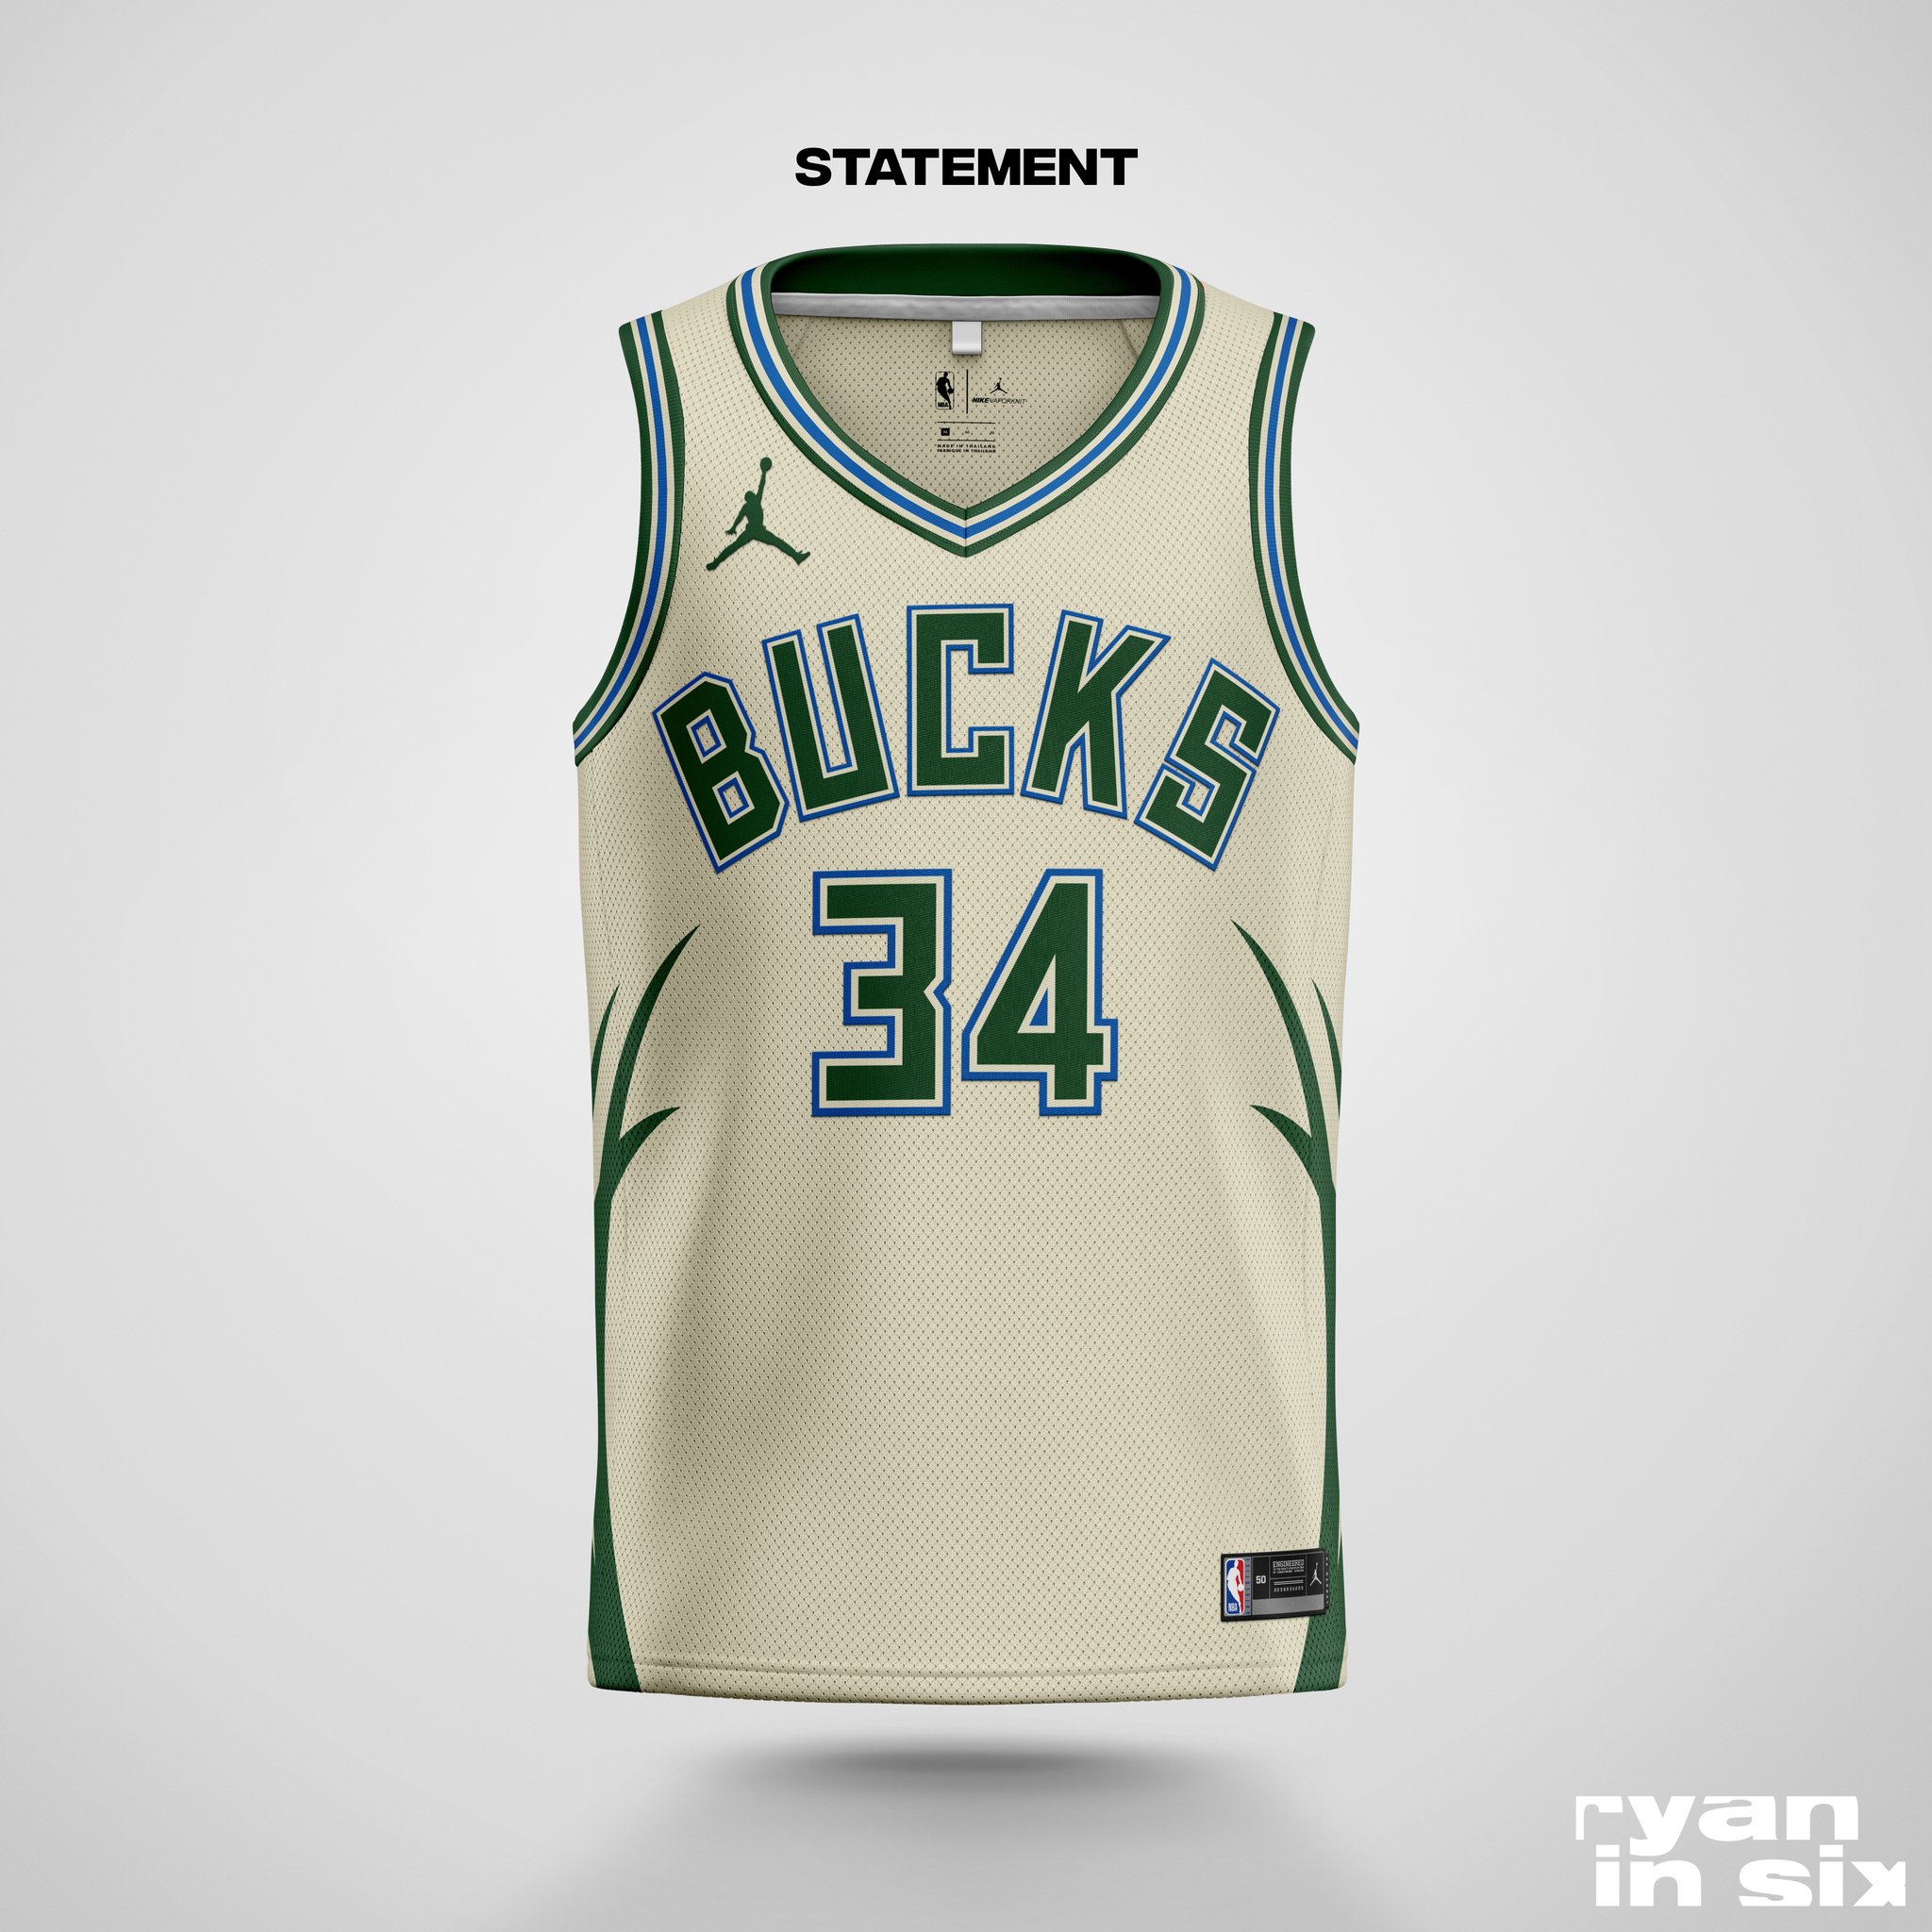 Bucks jersey redesign I made (IG @Lucsdesign91), I recently finished  designing all the NFL jerseys now I'm moving on to the NBA, I decided to do  a modernized take on the big